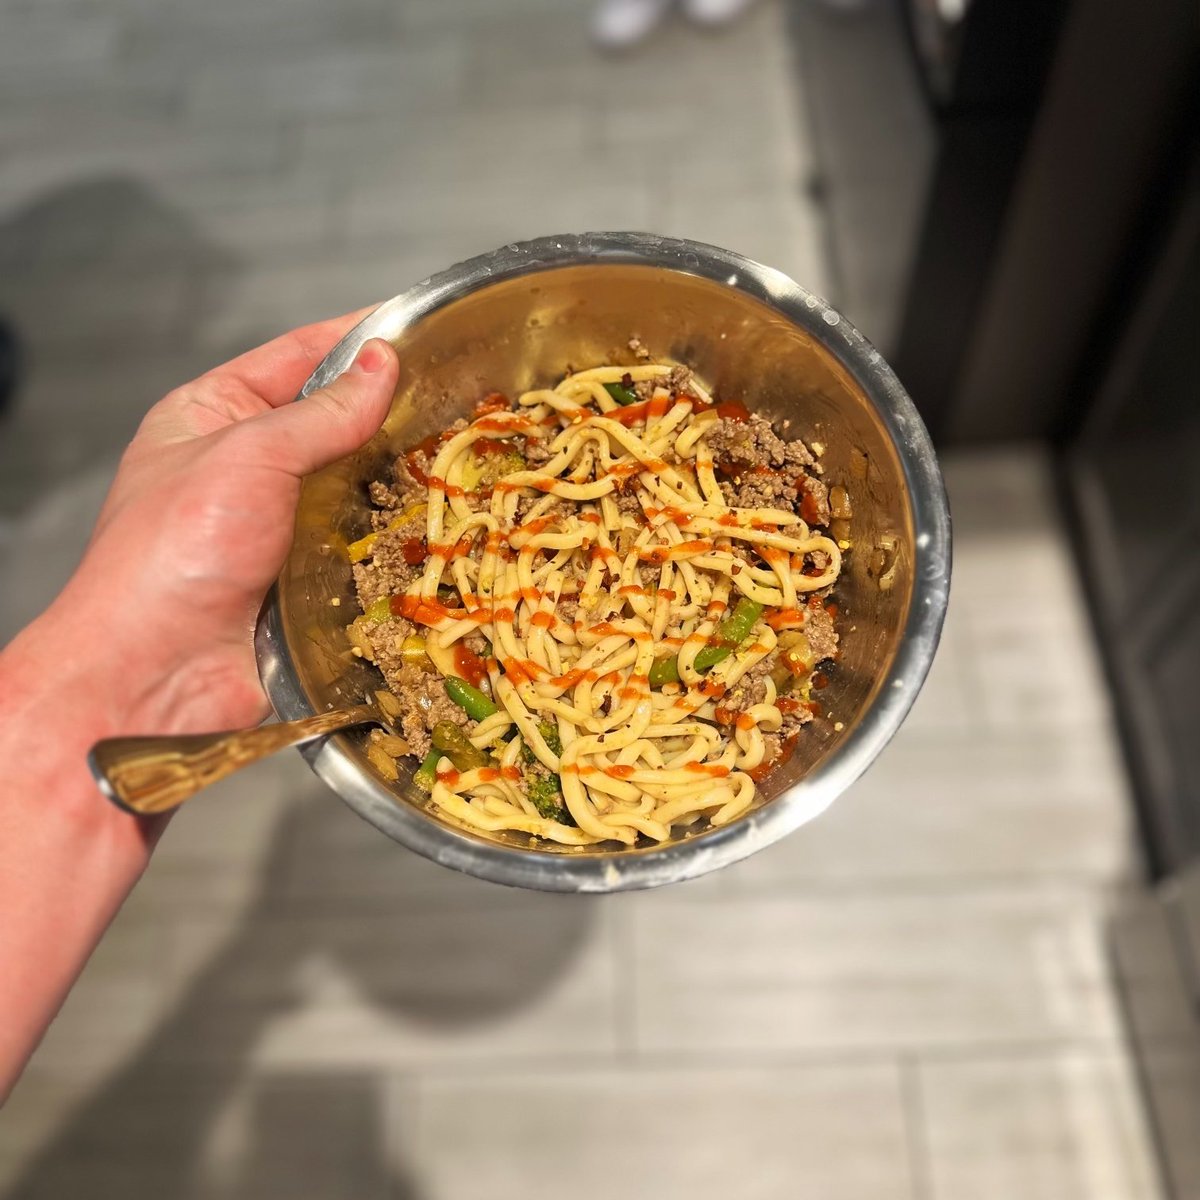 Post-training meal. 1lb grass fed 93/7 ground beef 3 servings stir fry veggies Packet of udon noodles Soy sauce, minced garlic, kung pao sauce, sriracha, red pepper flakes 1110 calories, 115g protein Let's watch some fights.